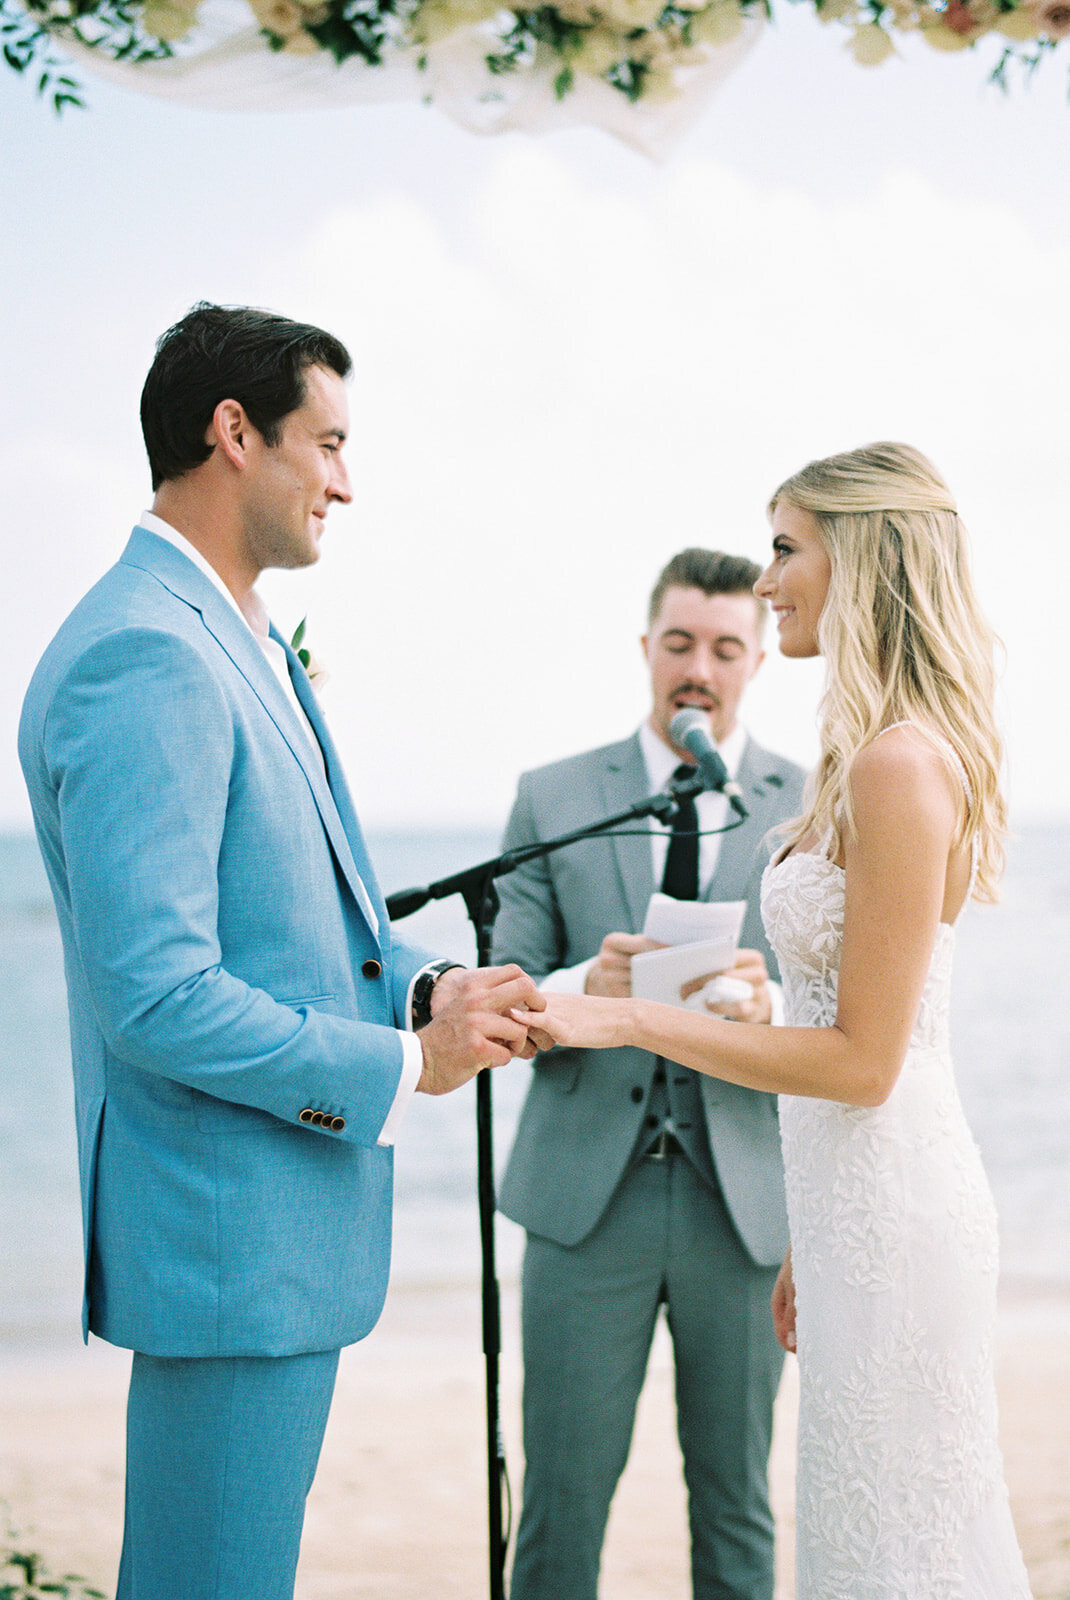 Beach elopement with modern couple at the alter